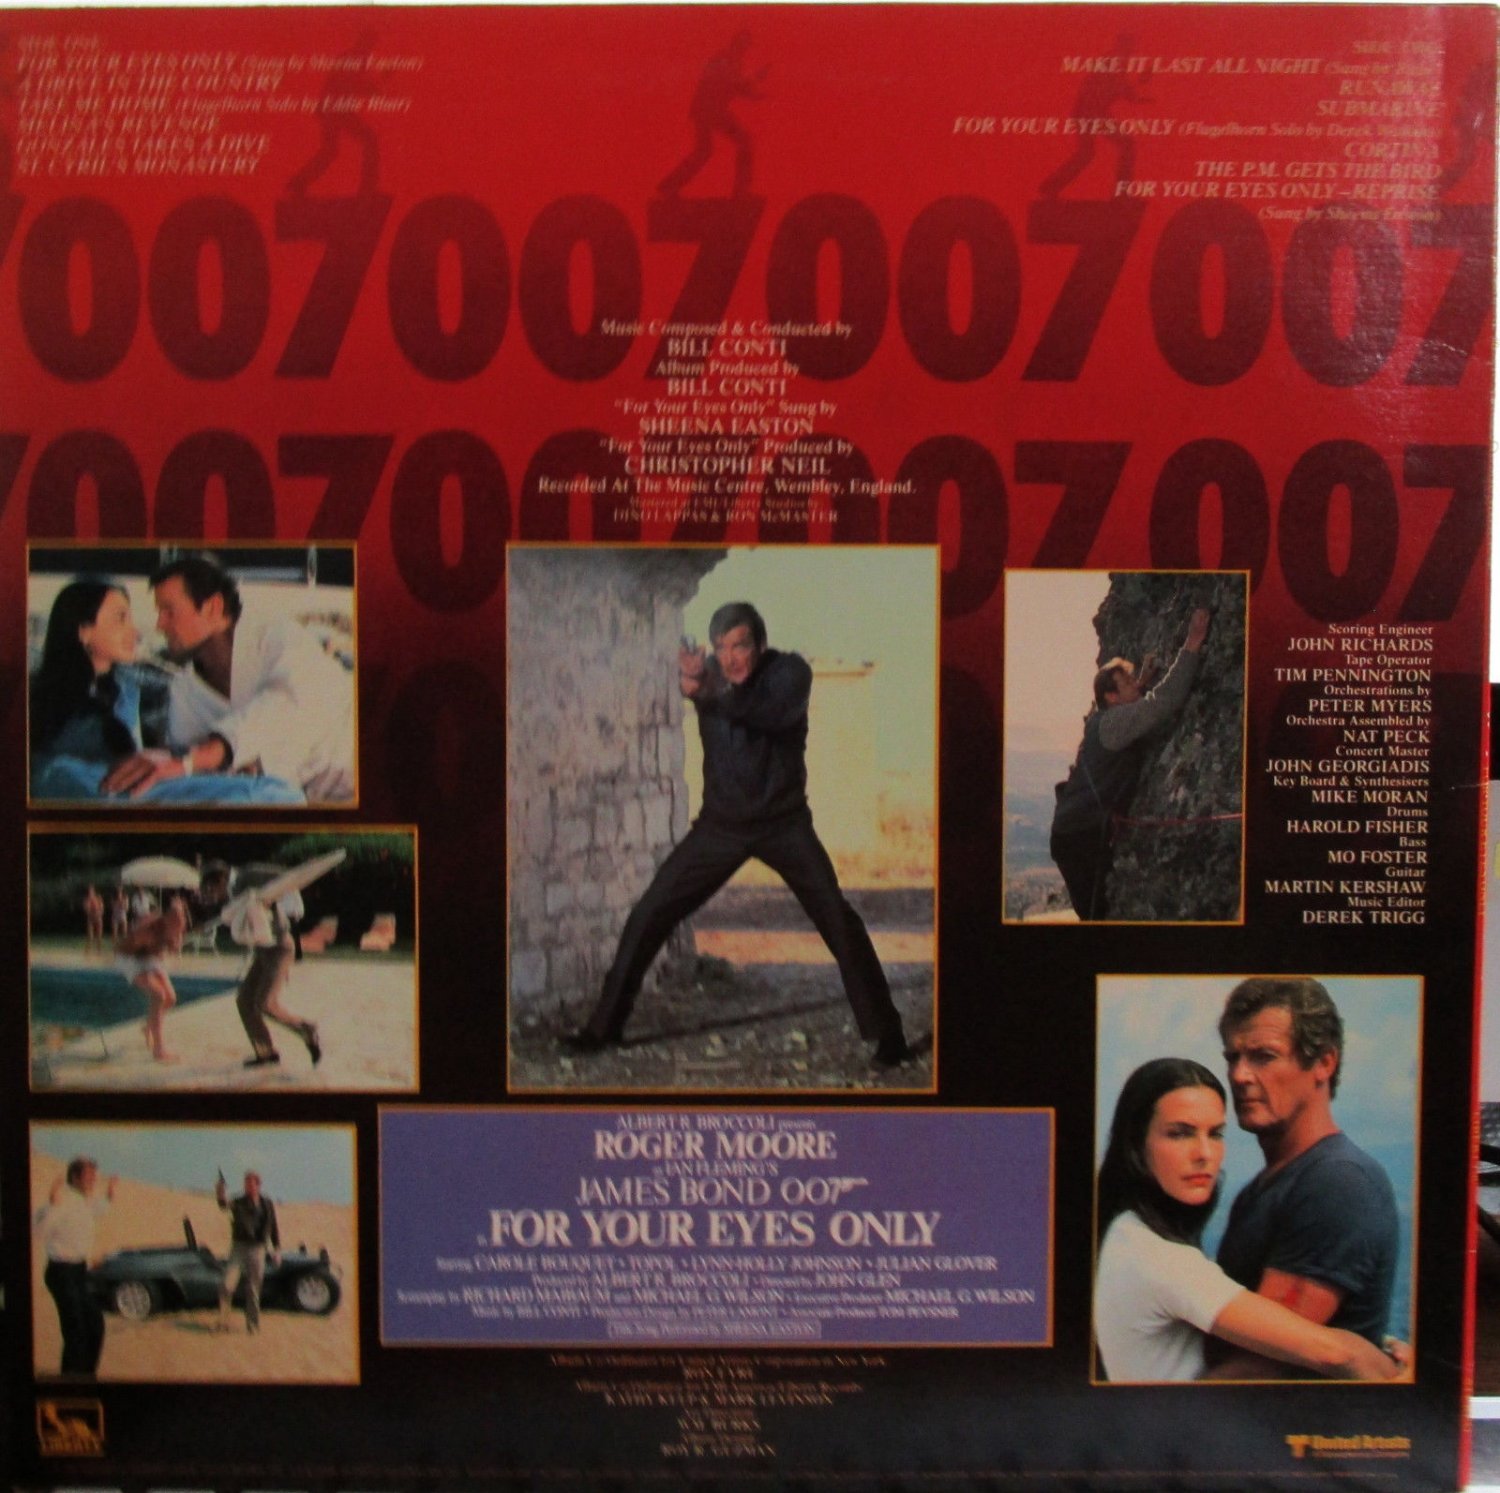 For Your Eyes Only James Bond Soundtrack Sheena Easton Bill Conti